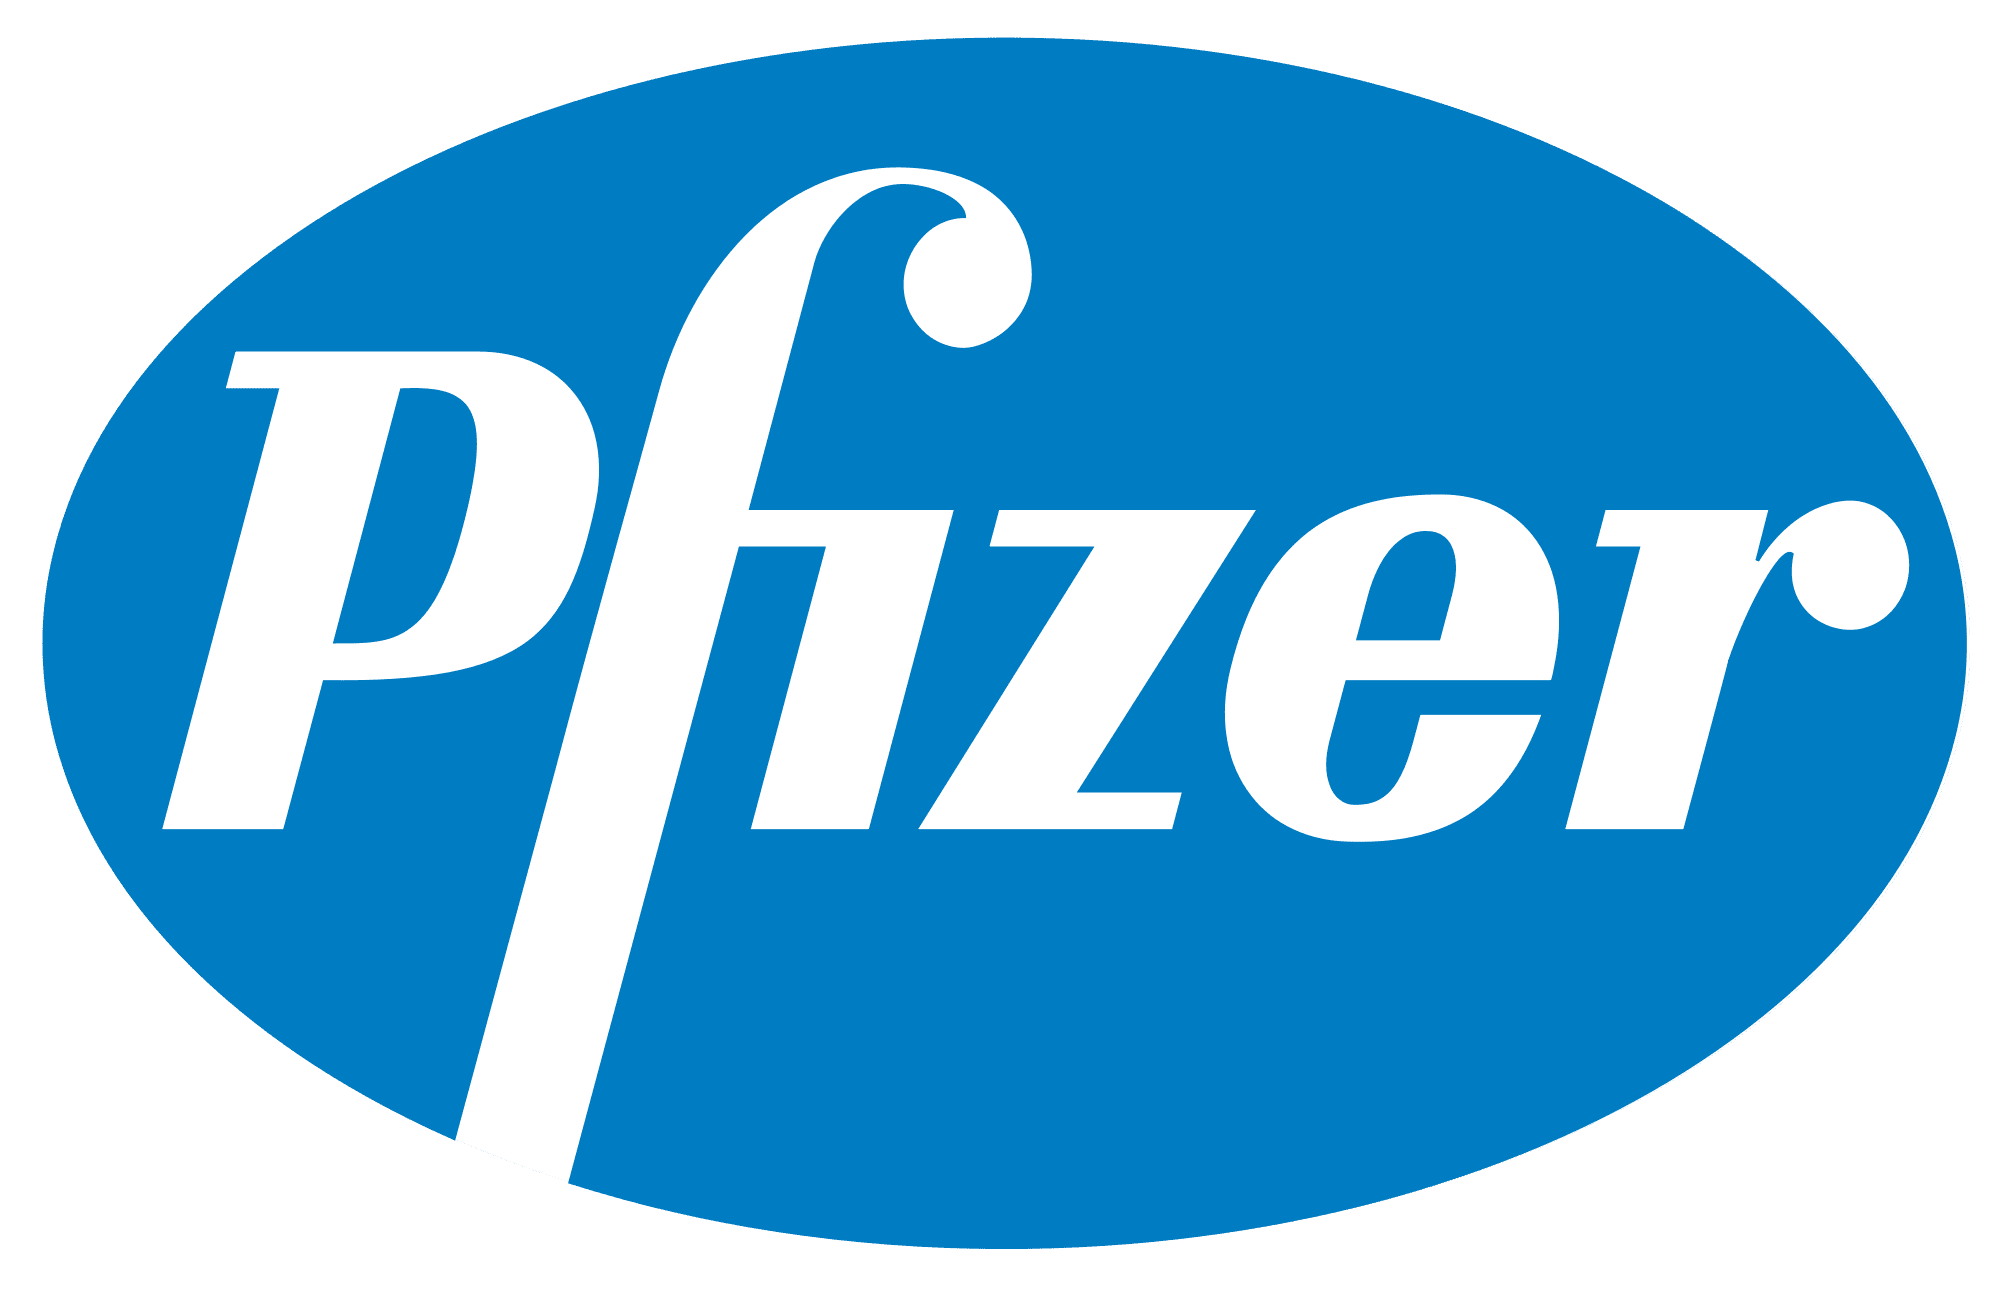 https://hermeticmobility.co.za/wp-content/uploads/sites/598/2020/06/Pfizer.png